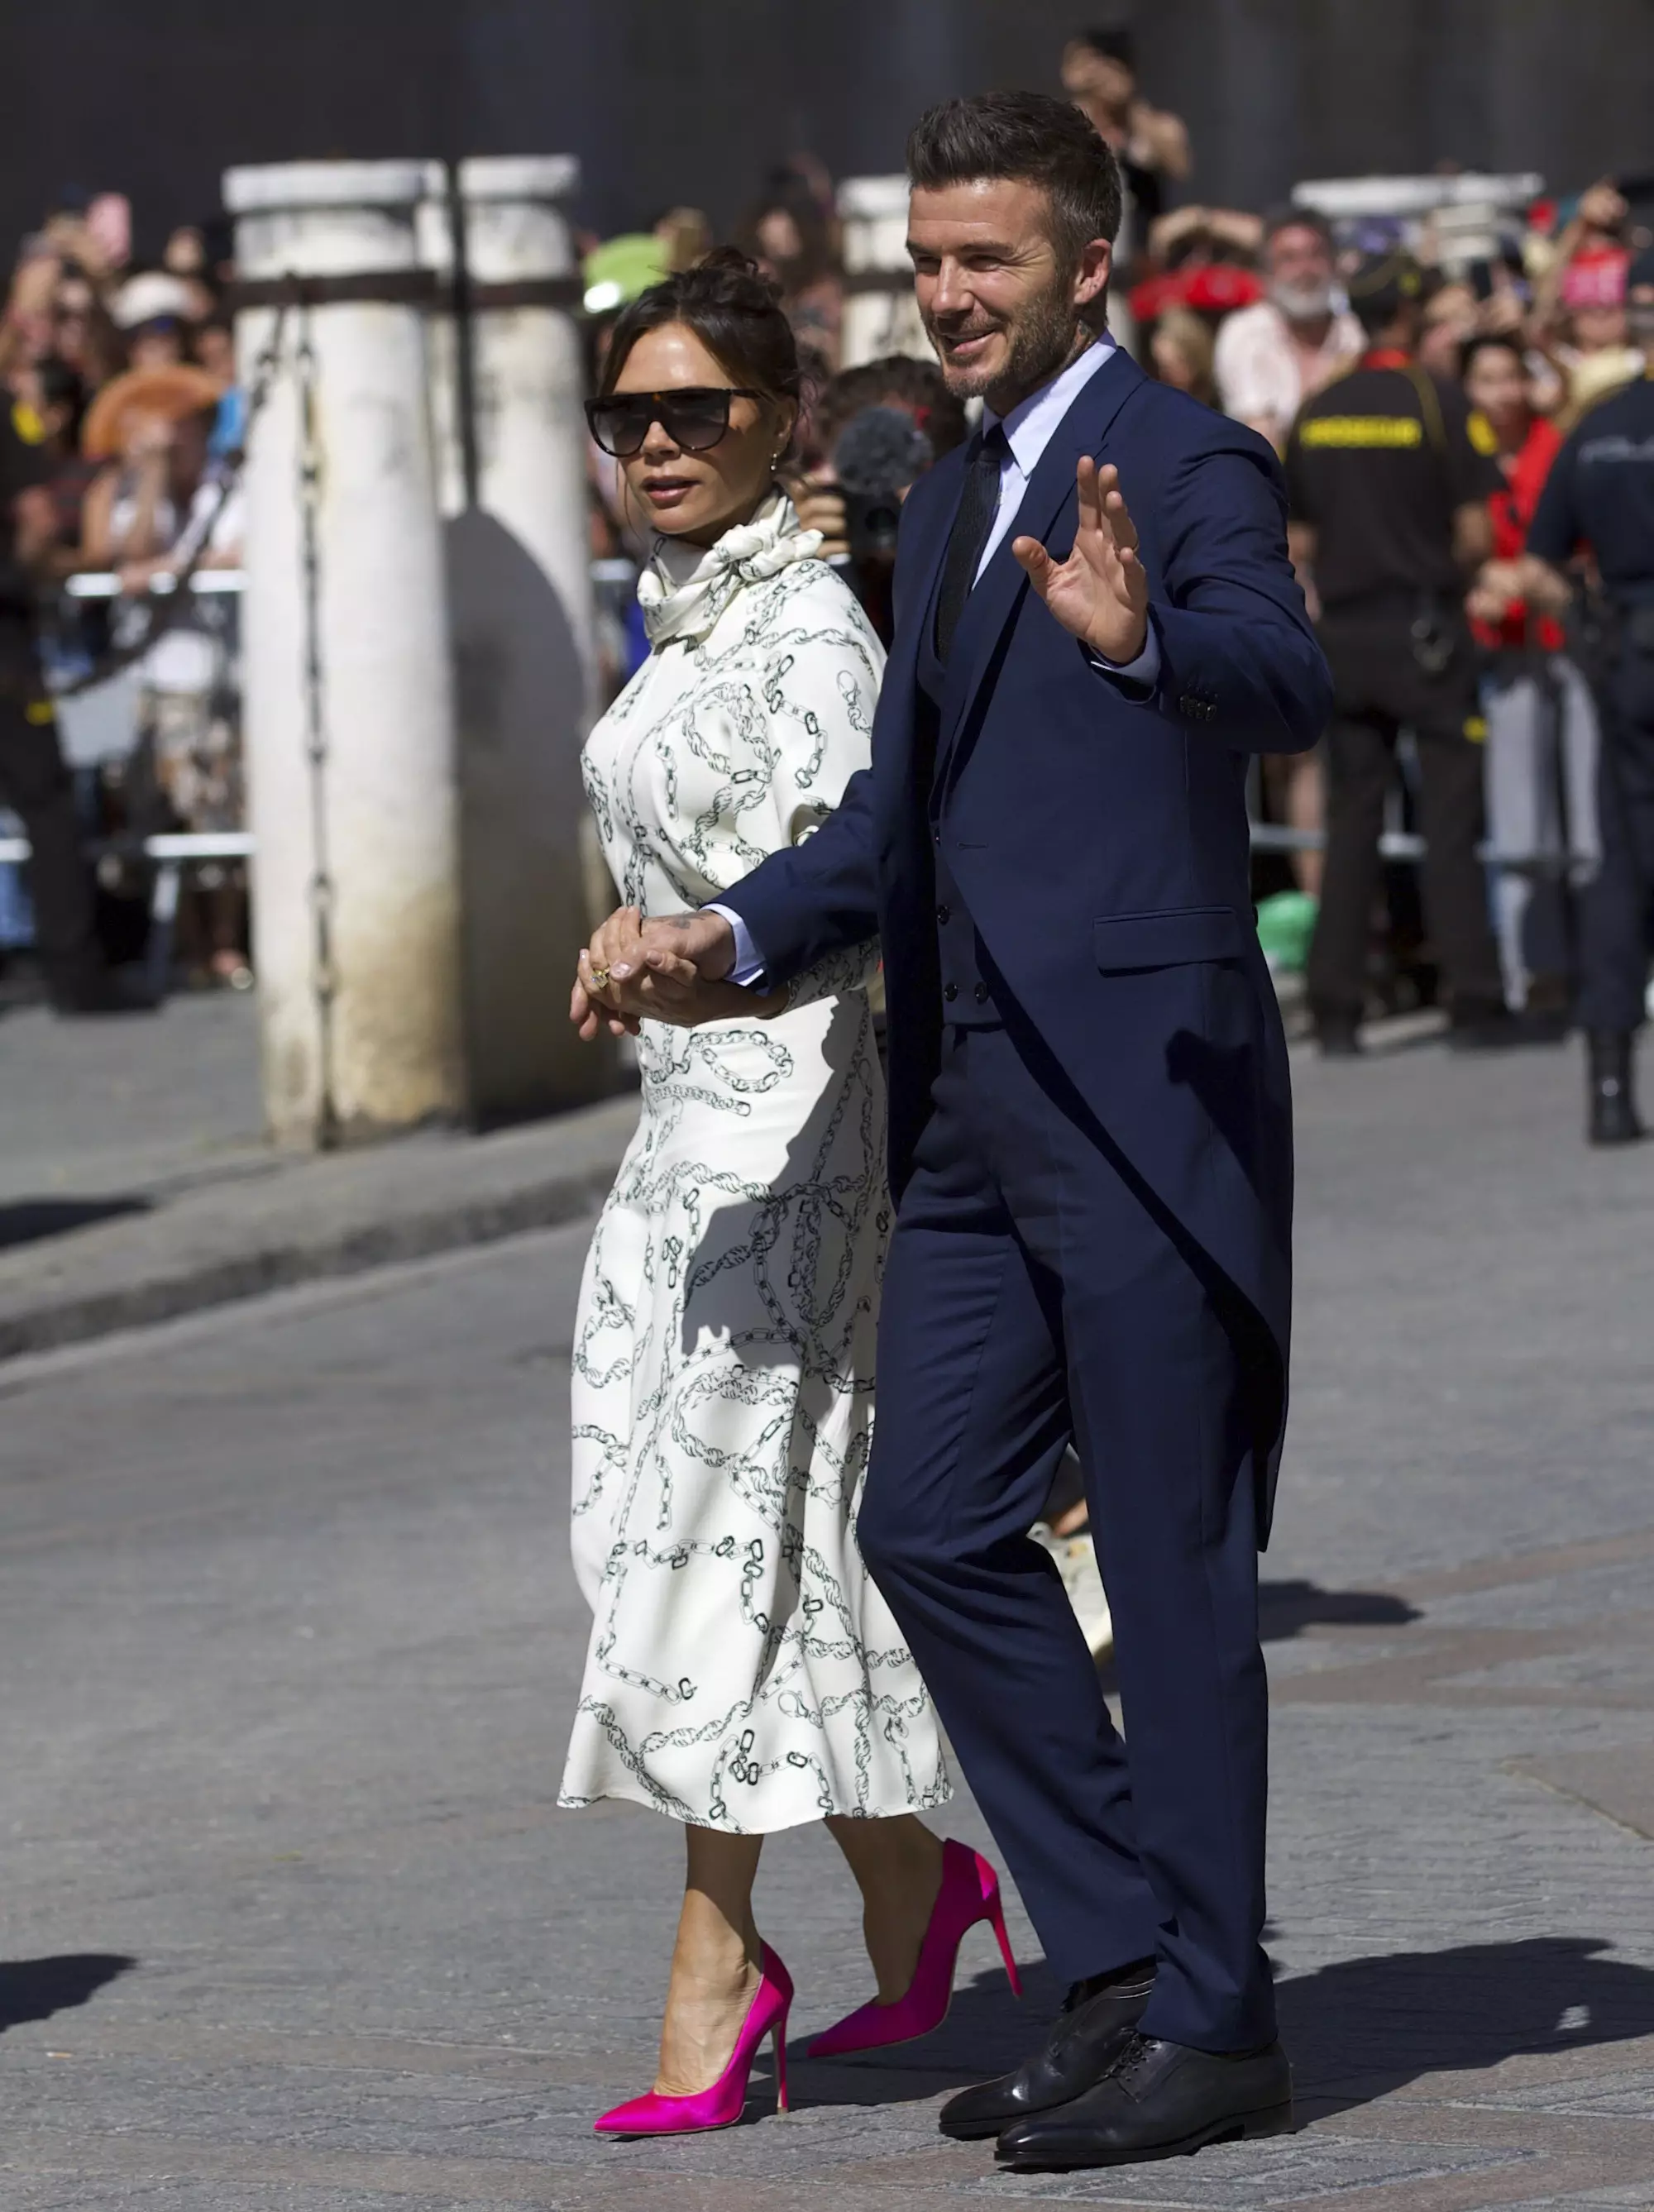 Victoria, pictured with husband David, attended Sergio Ramos wedding over the weekend.